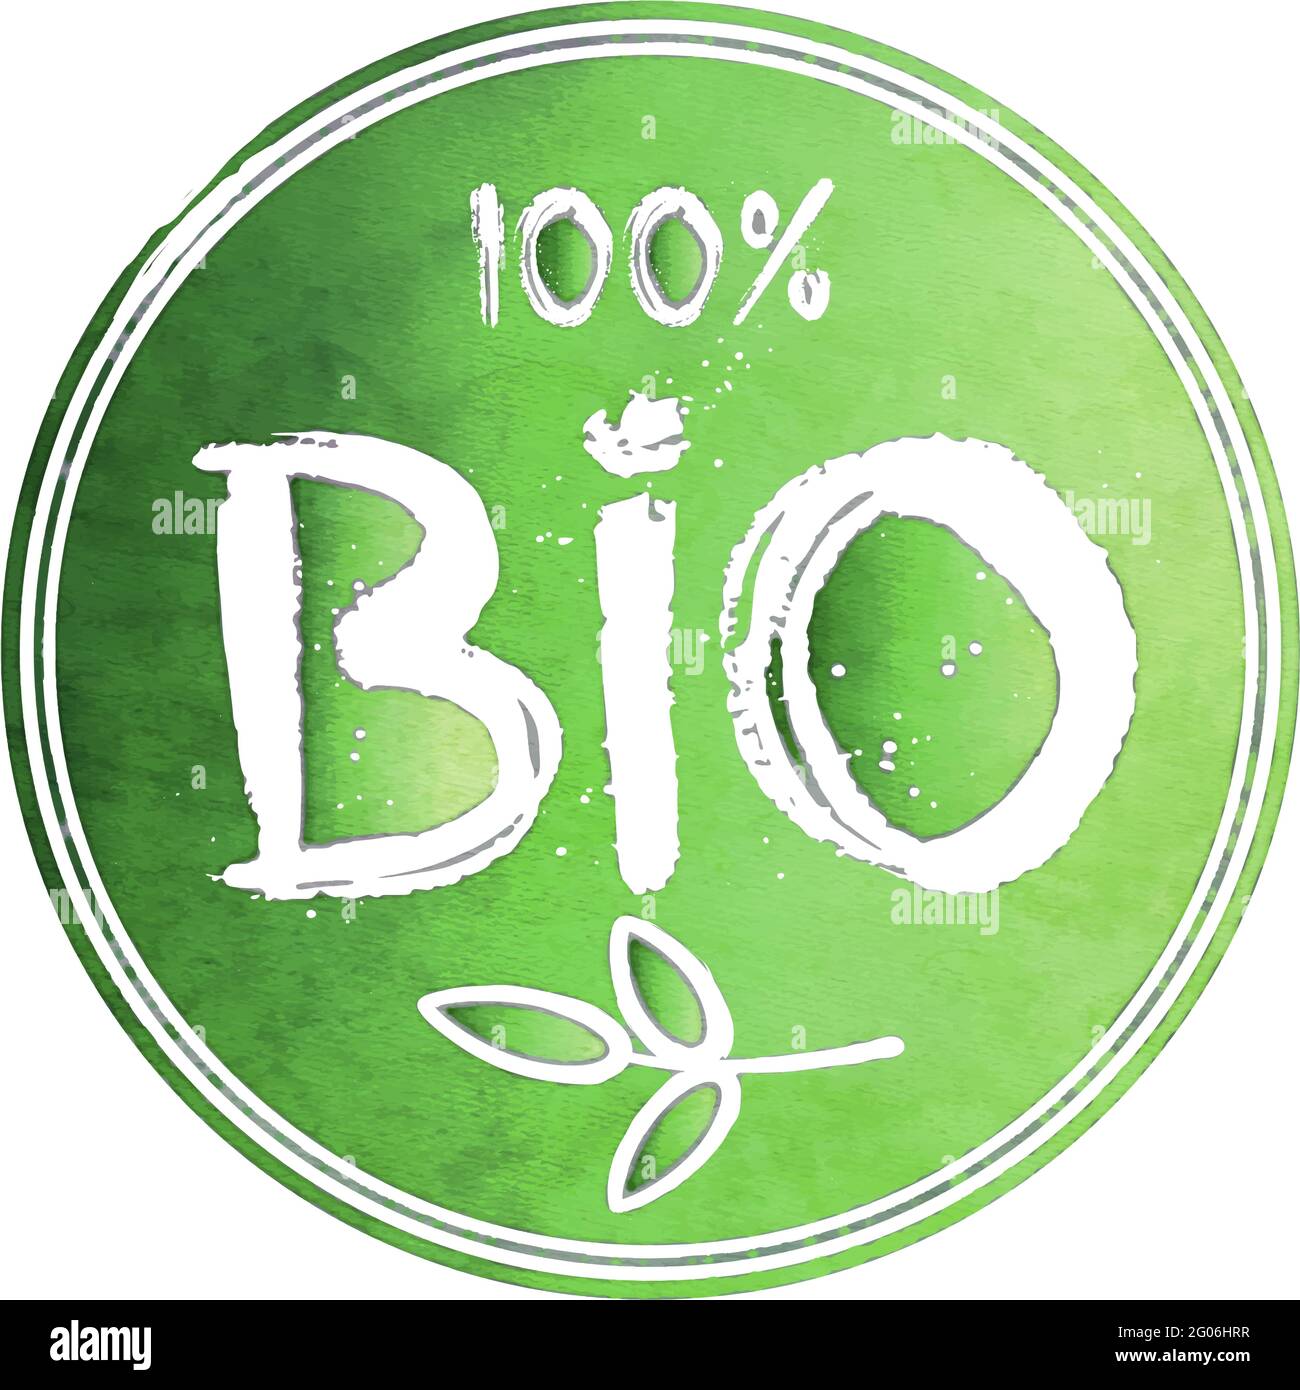 green watercolor 100 percent Bio label or stamp, round vector illustration Stock Vector